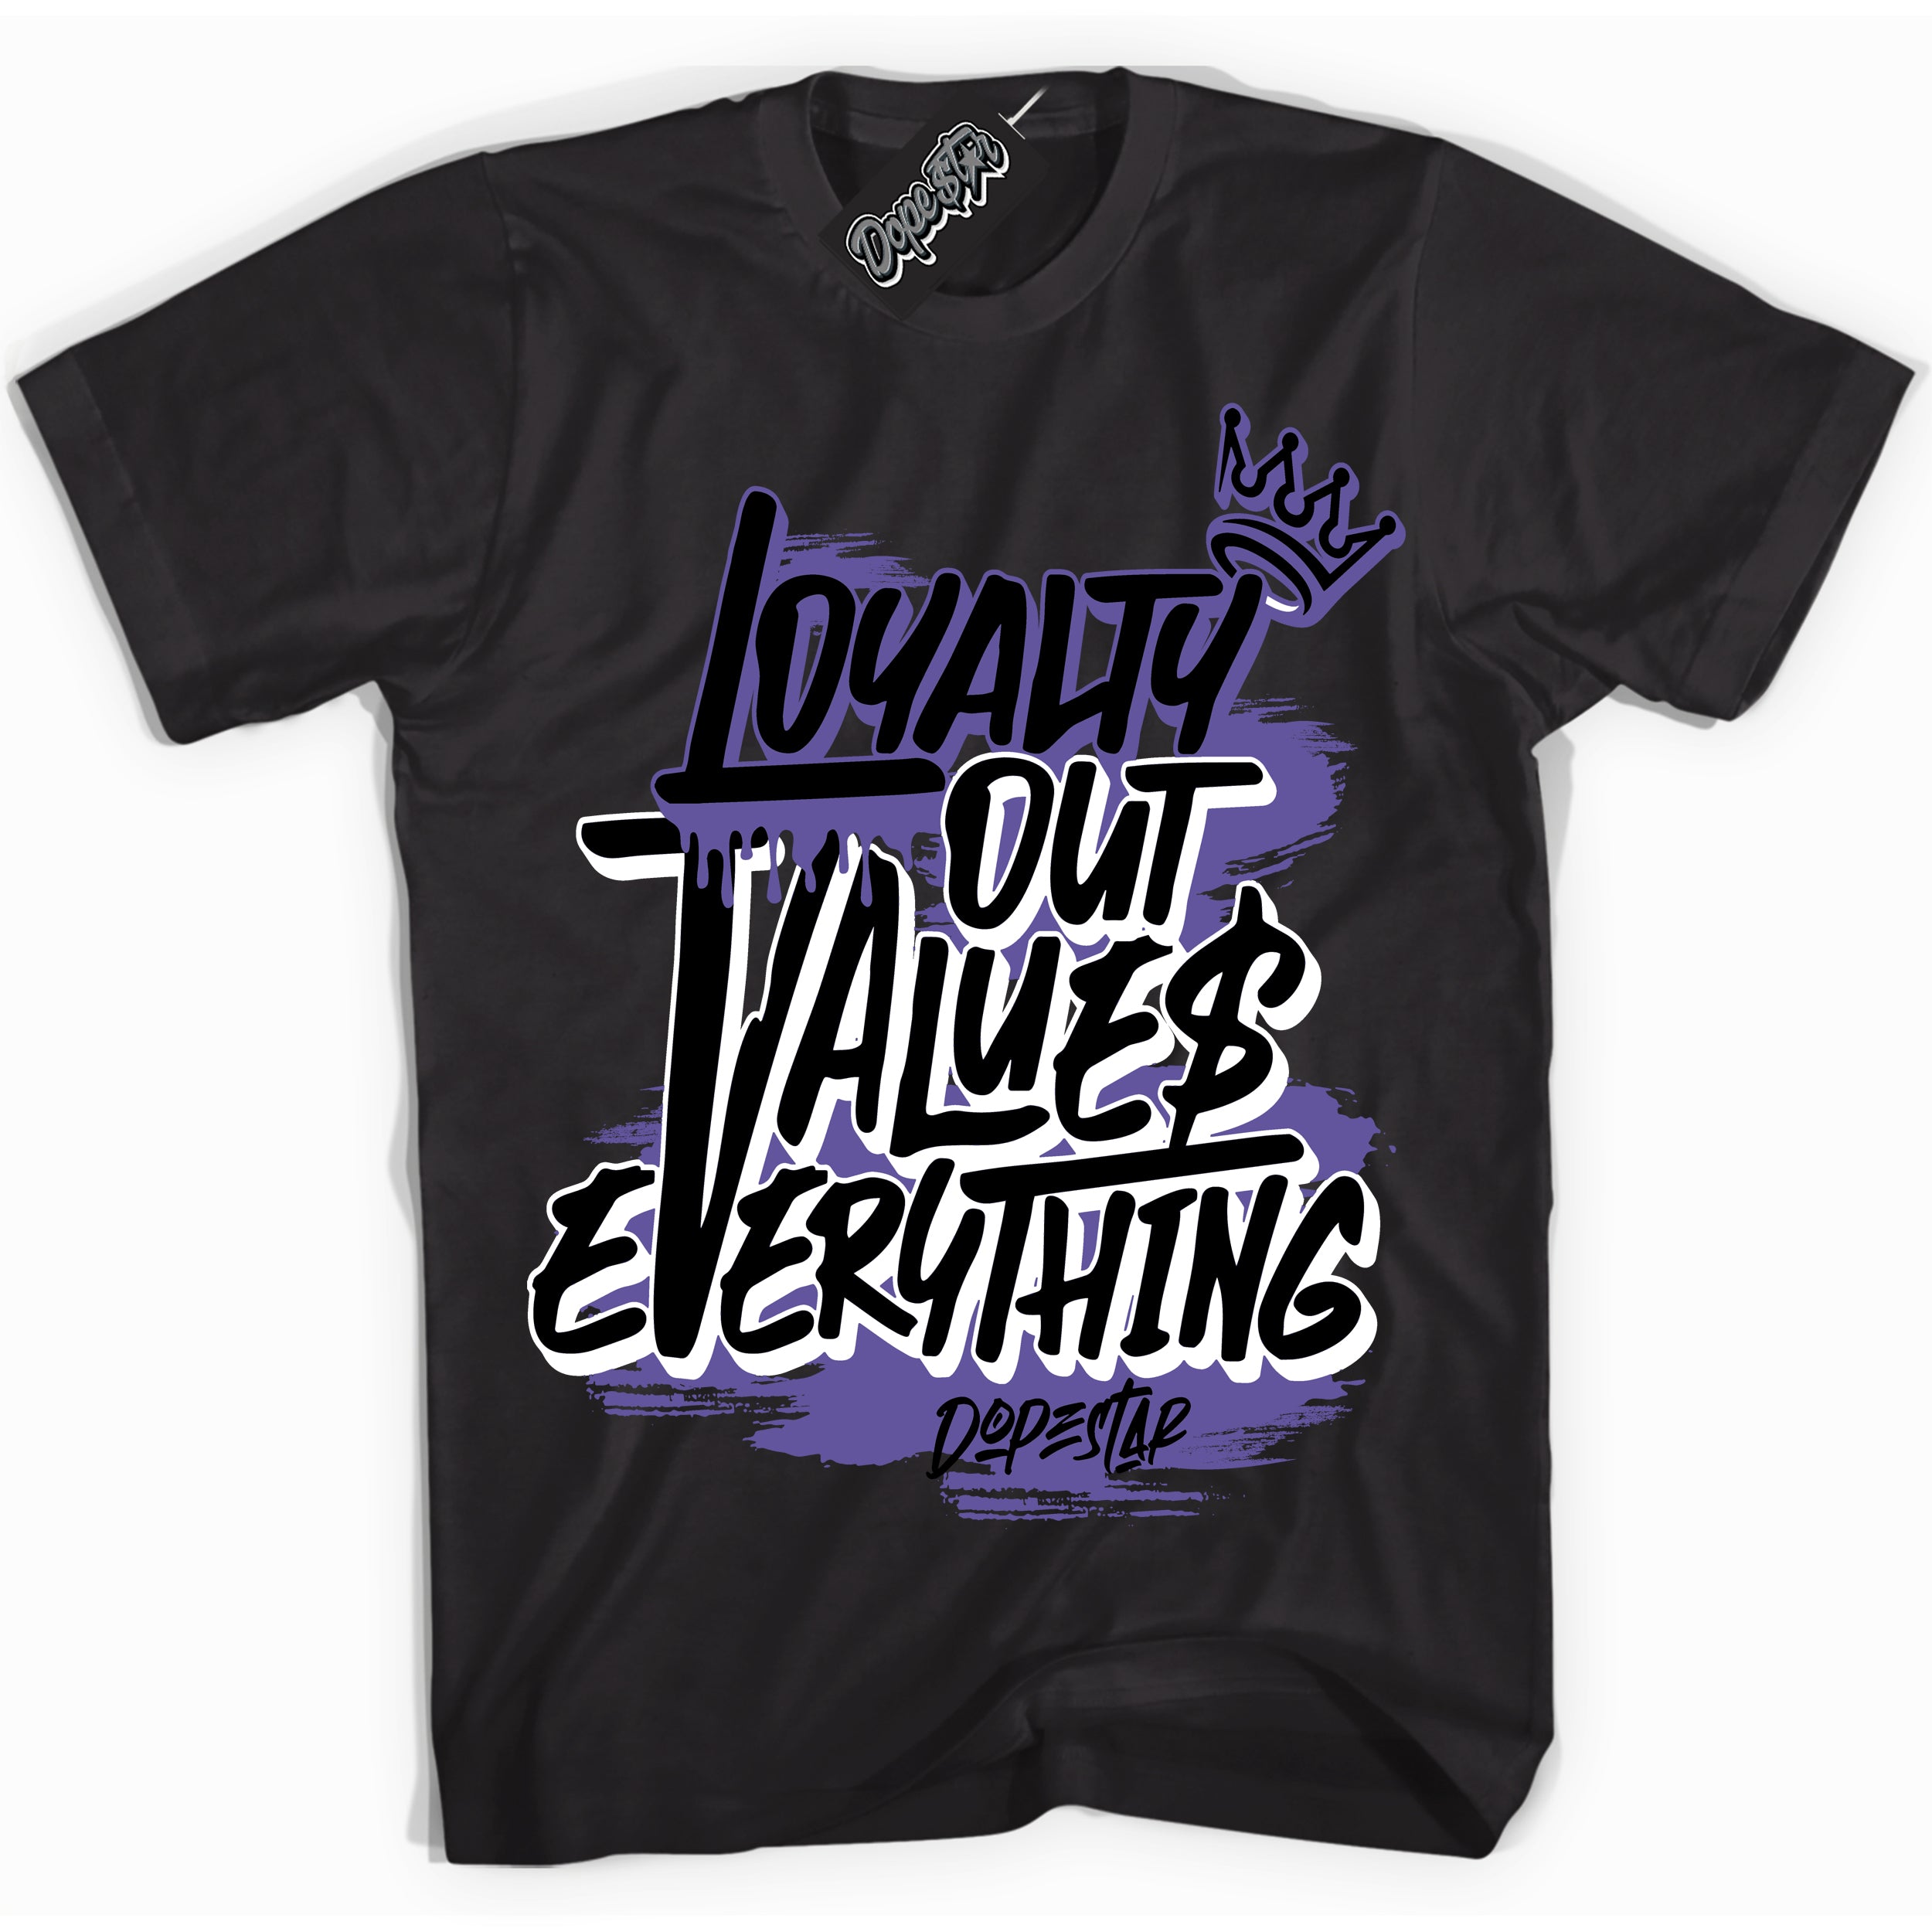 Cool Black Shirt with “ Loyalty Out Values Everything” design that perfectly matches Psychic Purple Sneakers.